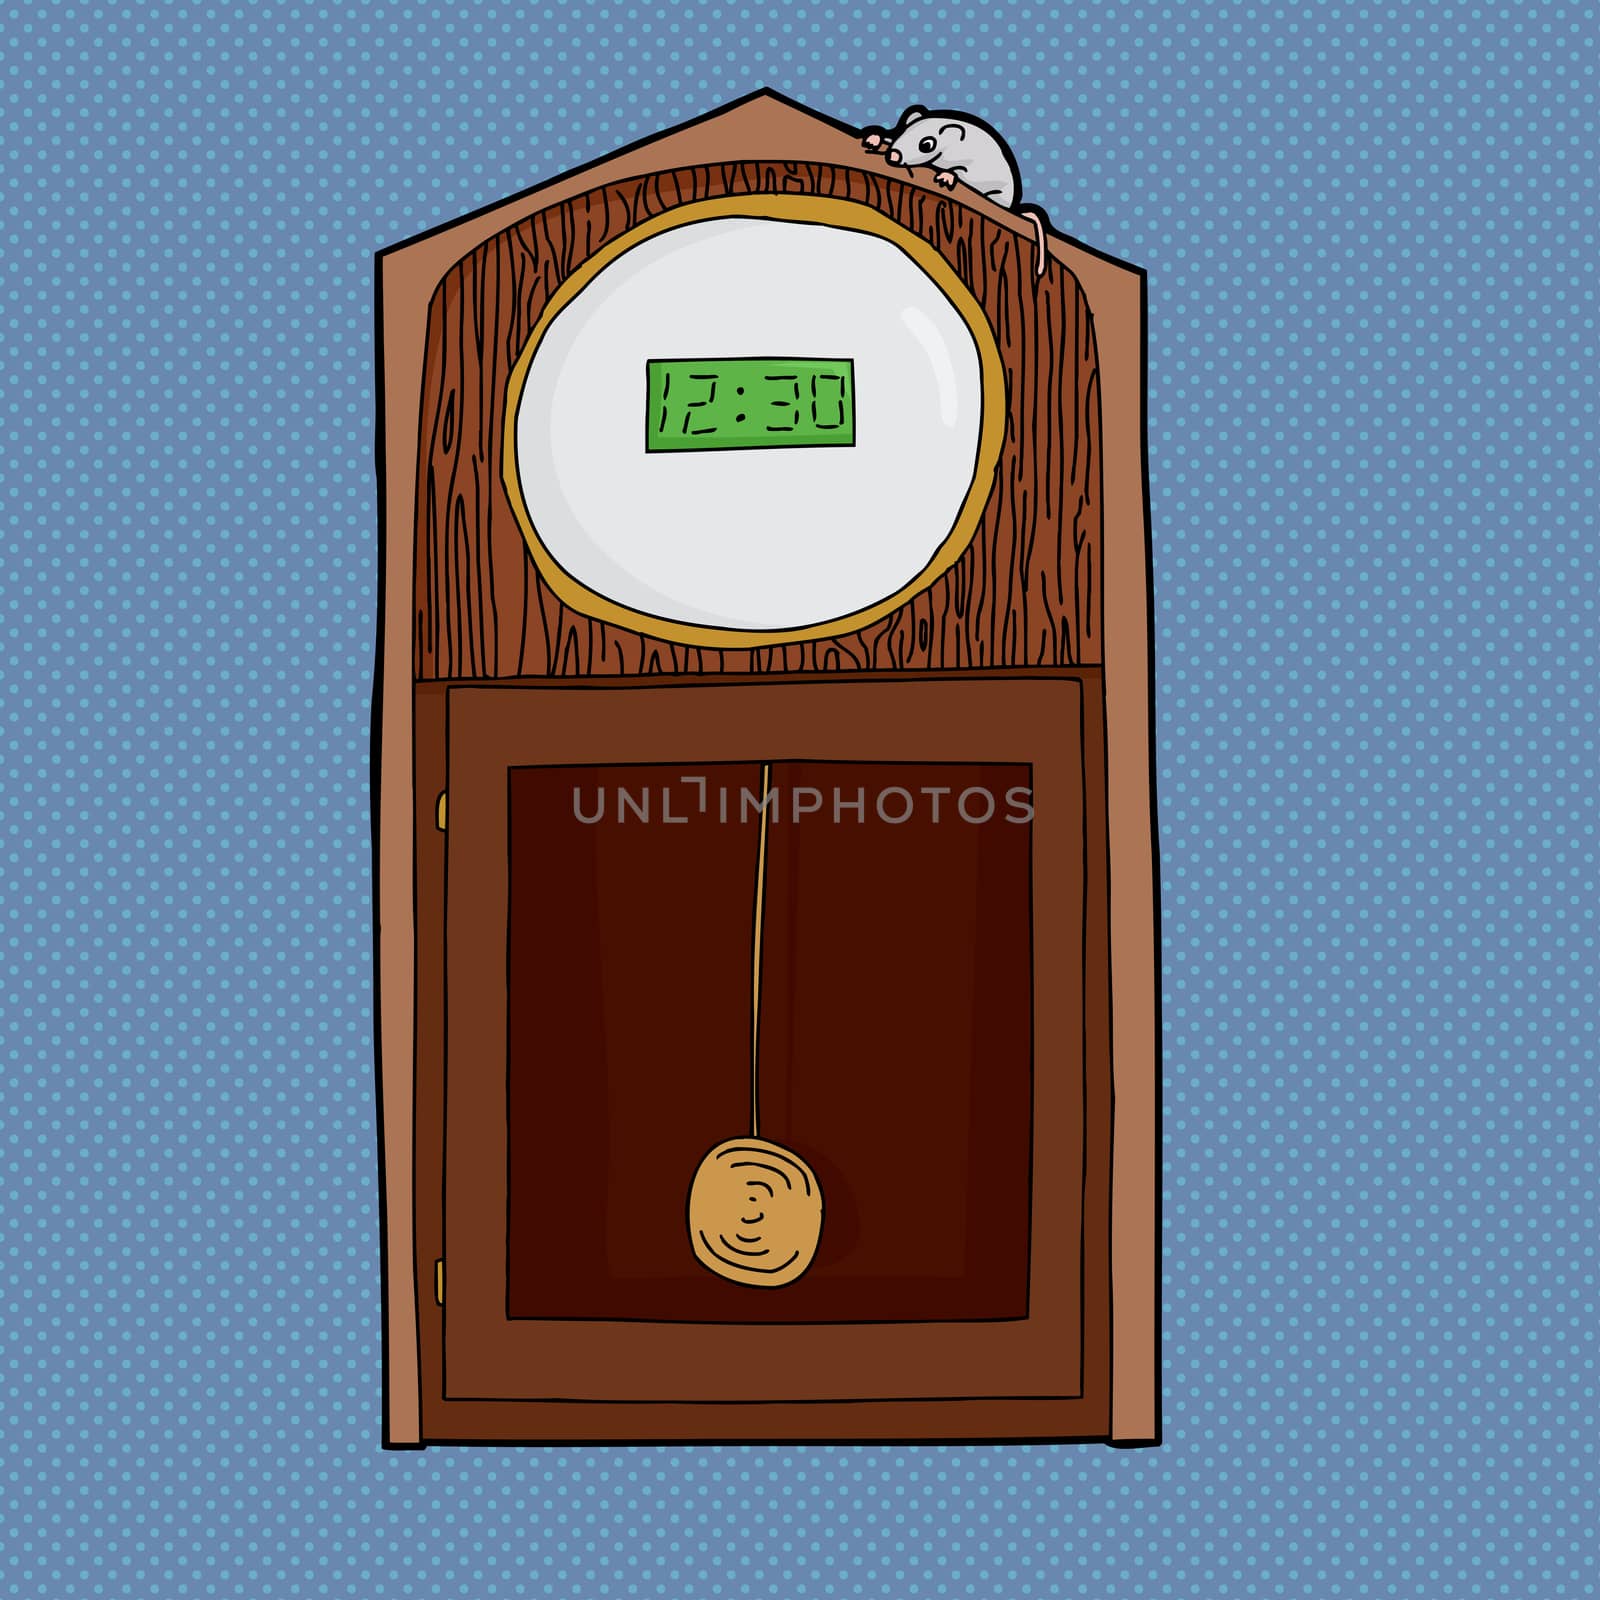 Clock with Digital Face and Mouse by TheBlackRhino